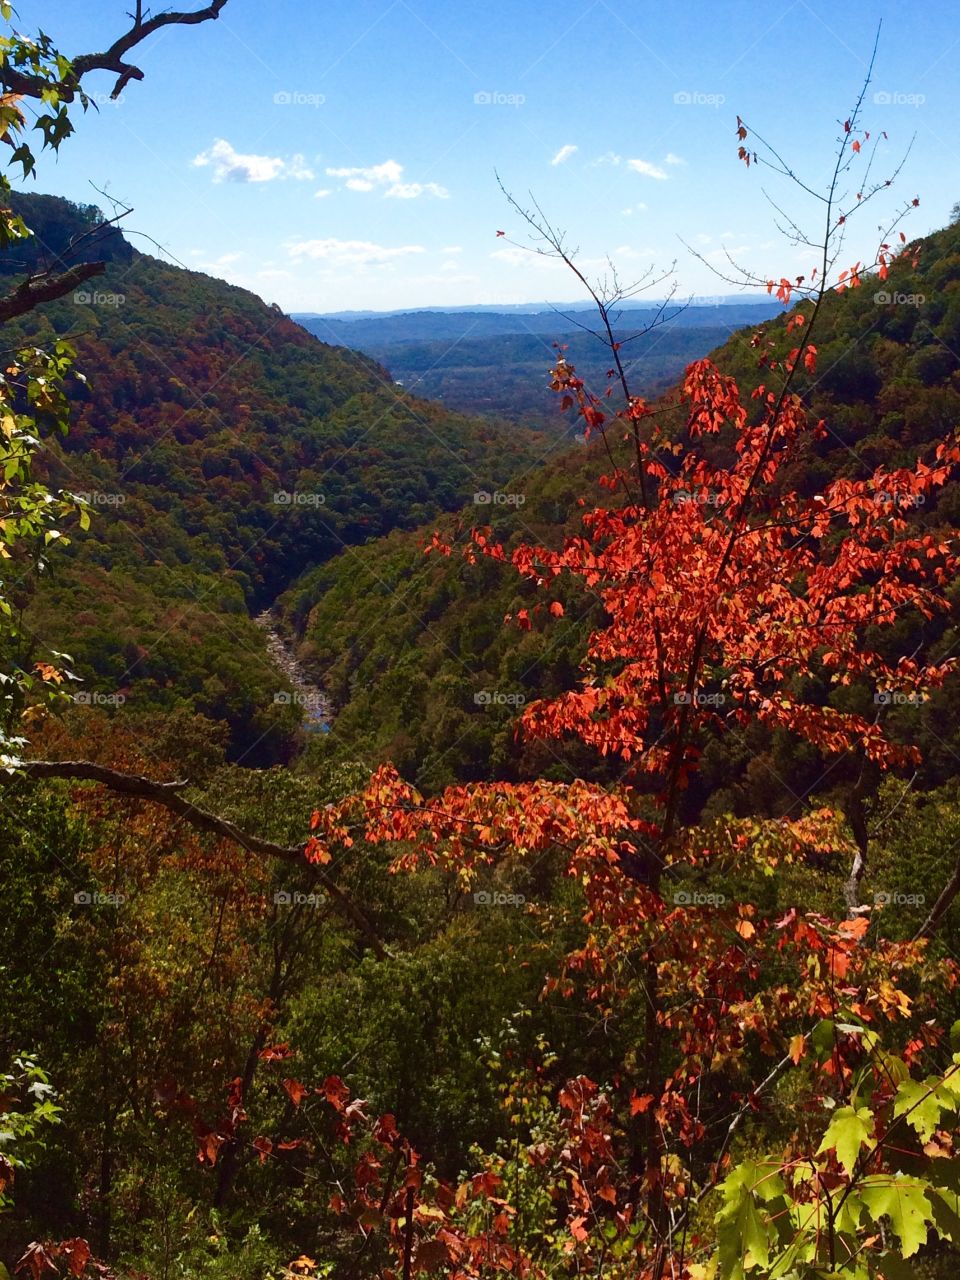 Took this beautiful Fall picture when I was hiking in Soddy Daisy, Tennessee! 